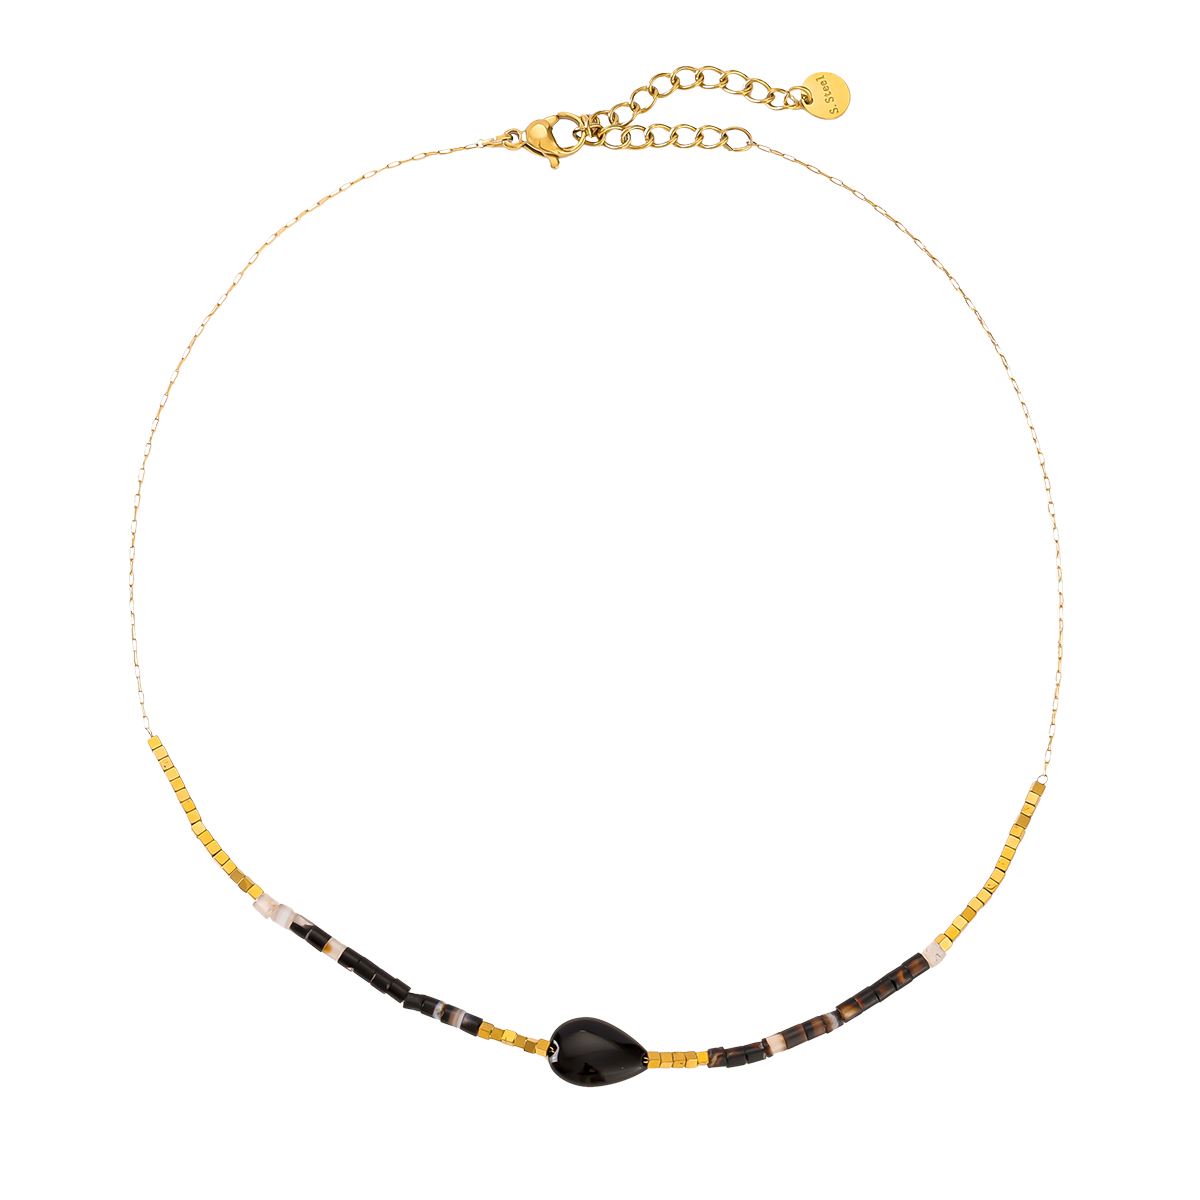 33cm Natural Stone And One Black Drop With Simple Chain Edelstahl Choker   